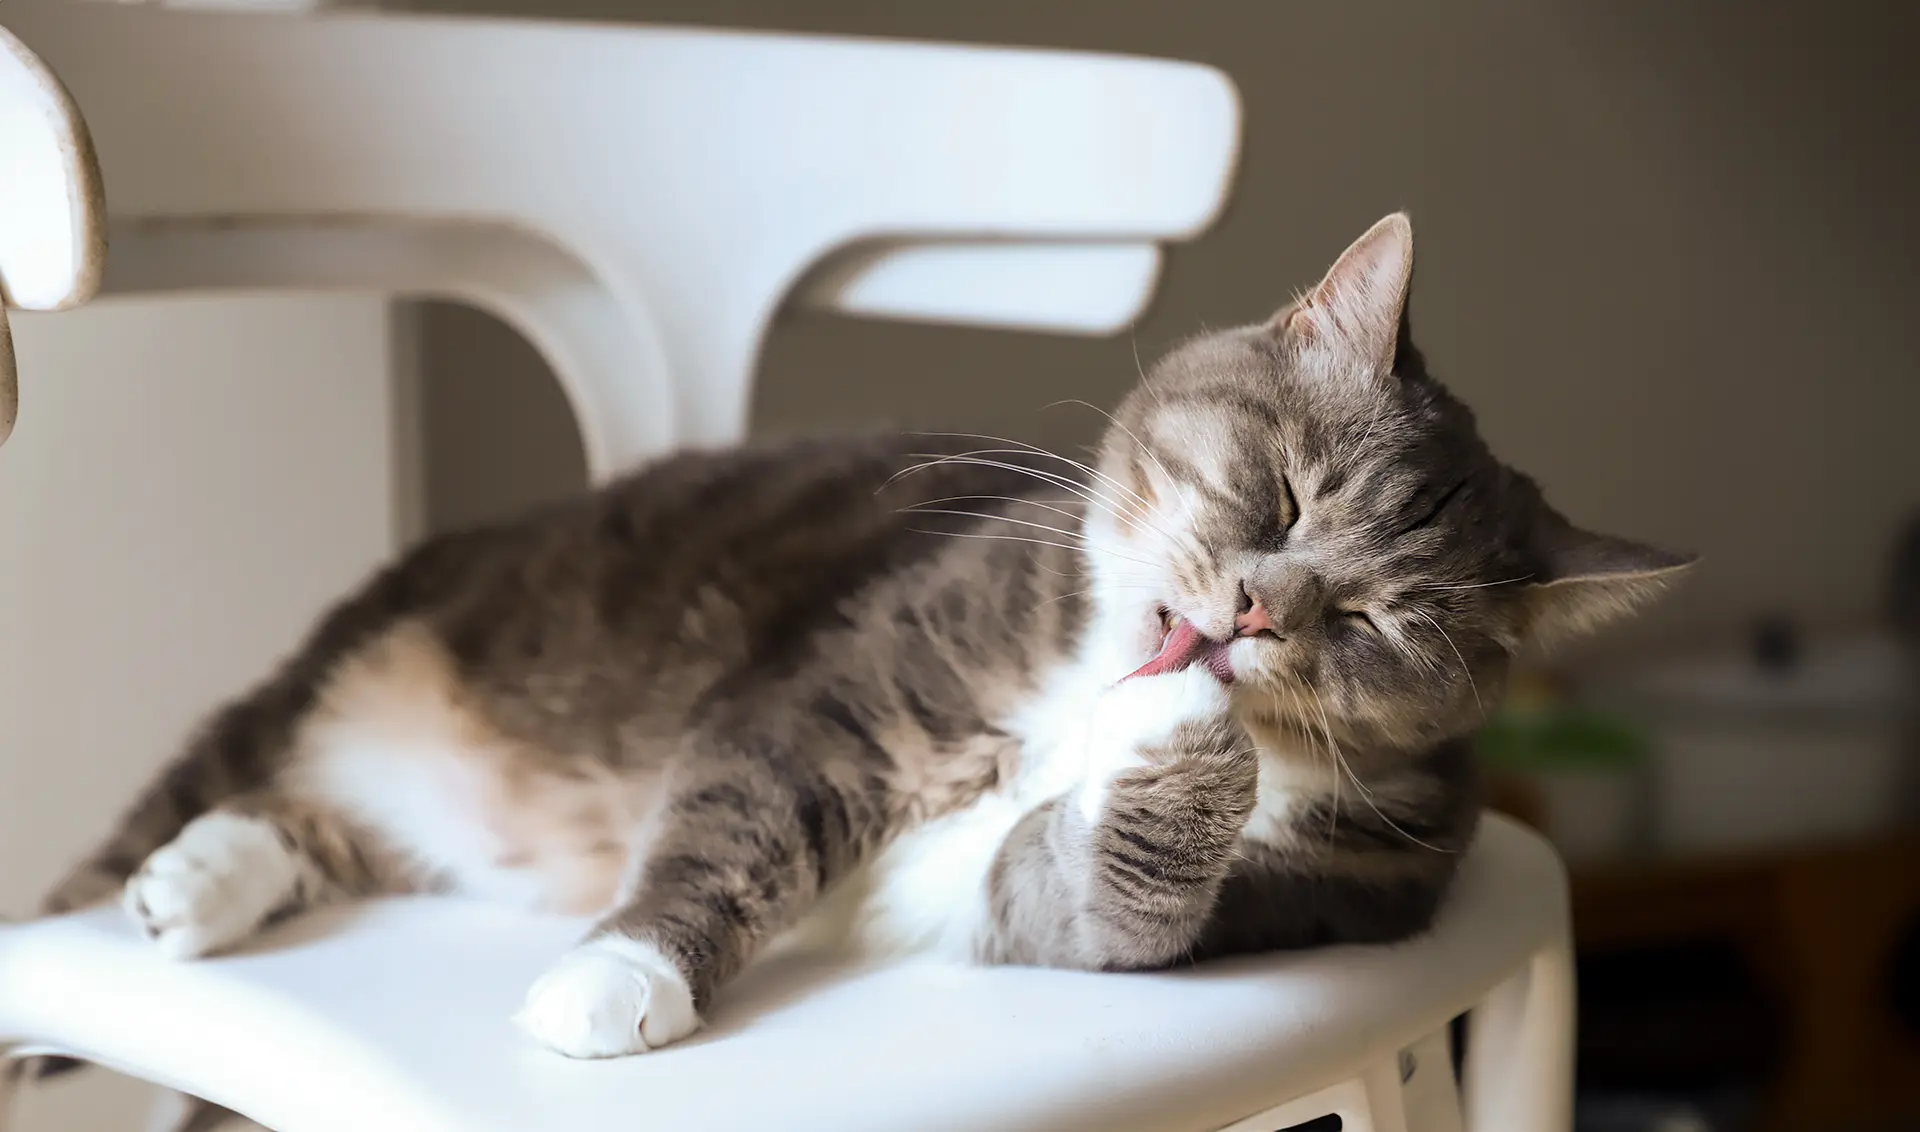 Dental Cleaning in Cats